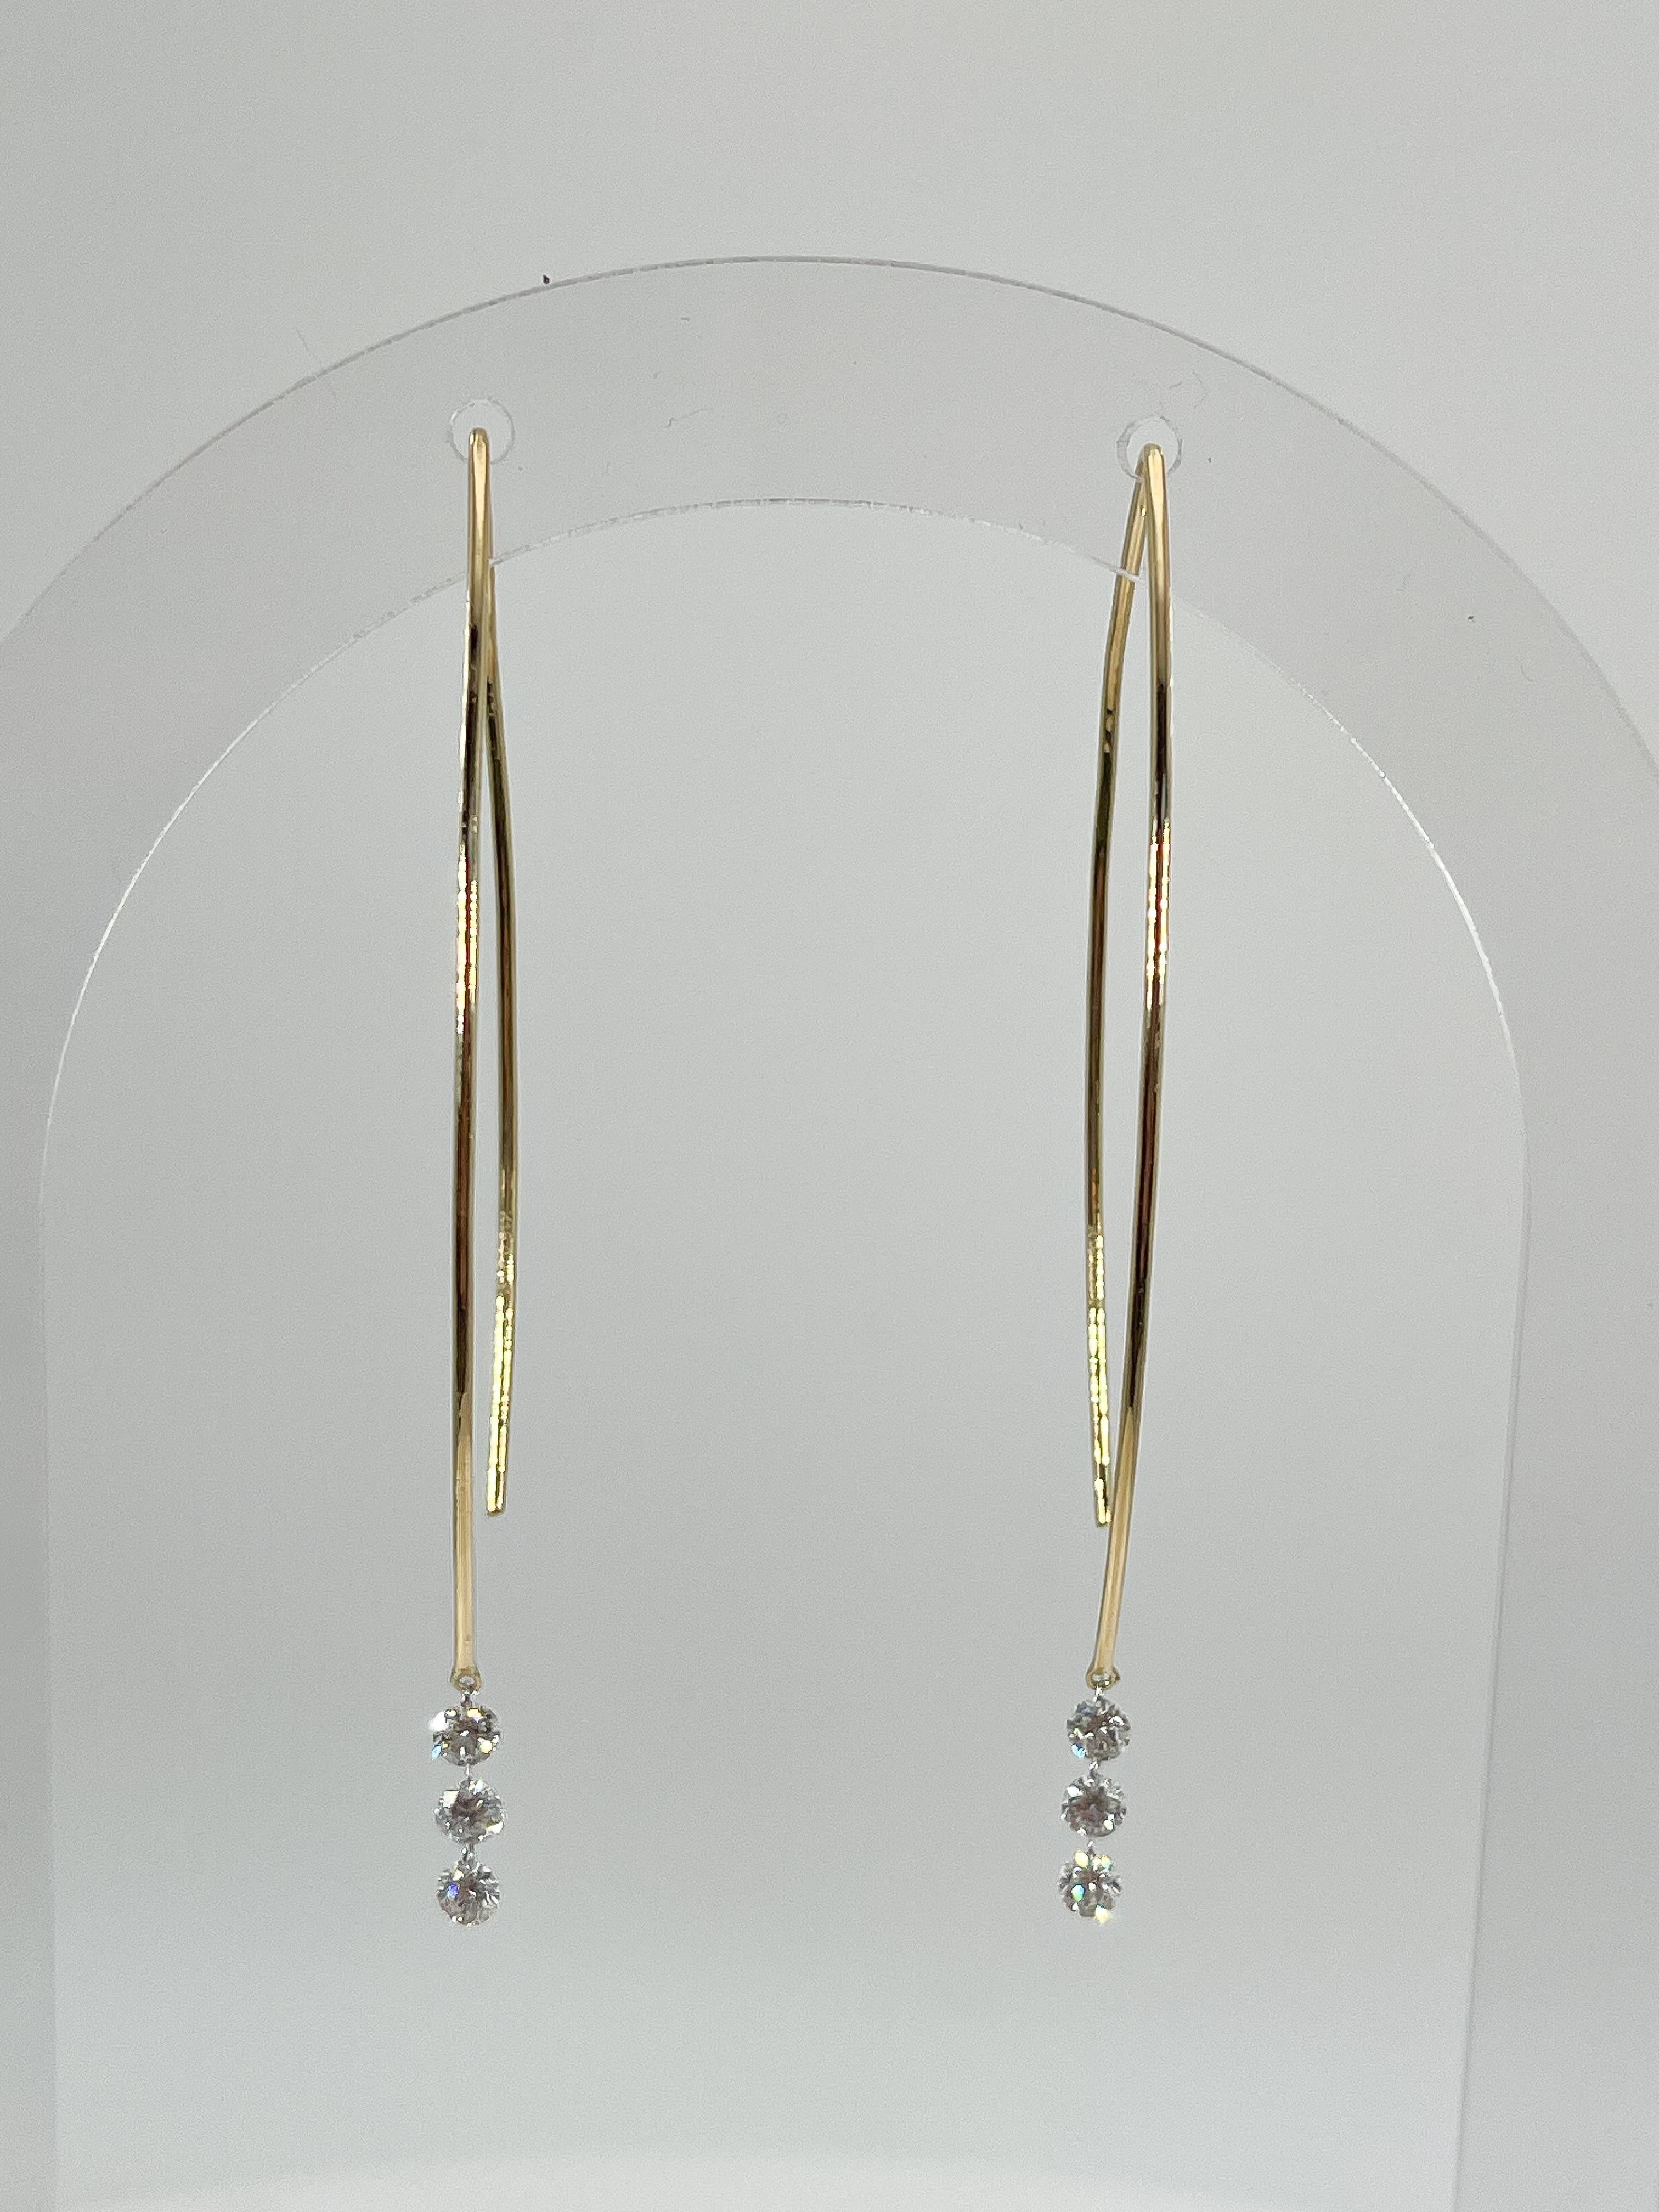 14k yellow gold large fancy hoop with .57 CTW diamonds. Each earring has 3 individually drilled diamonds for a seamless look. Hoop measures 17.5 x 49.8 mm and both earrings have a total weight of 3 grams.